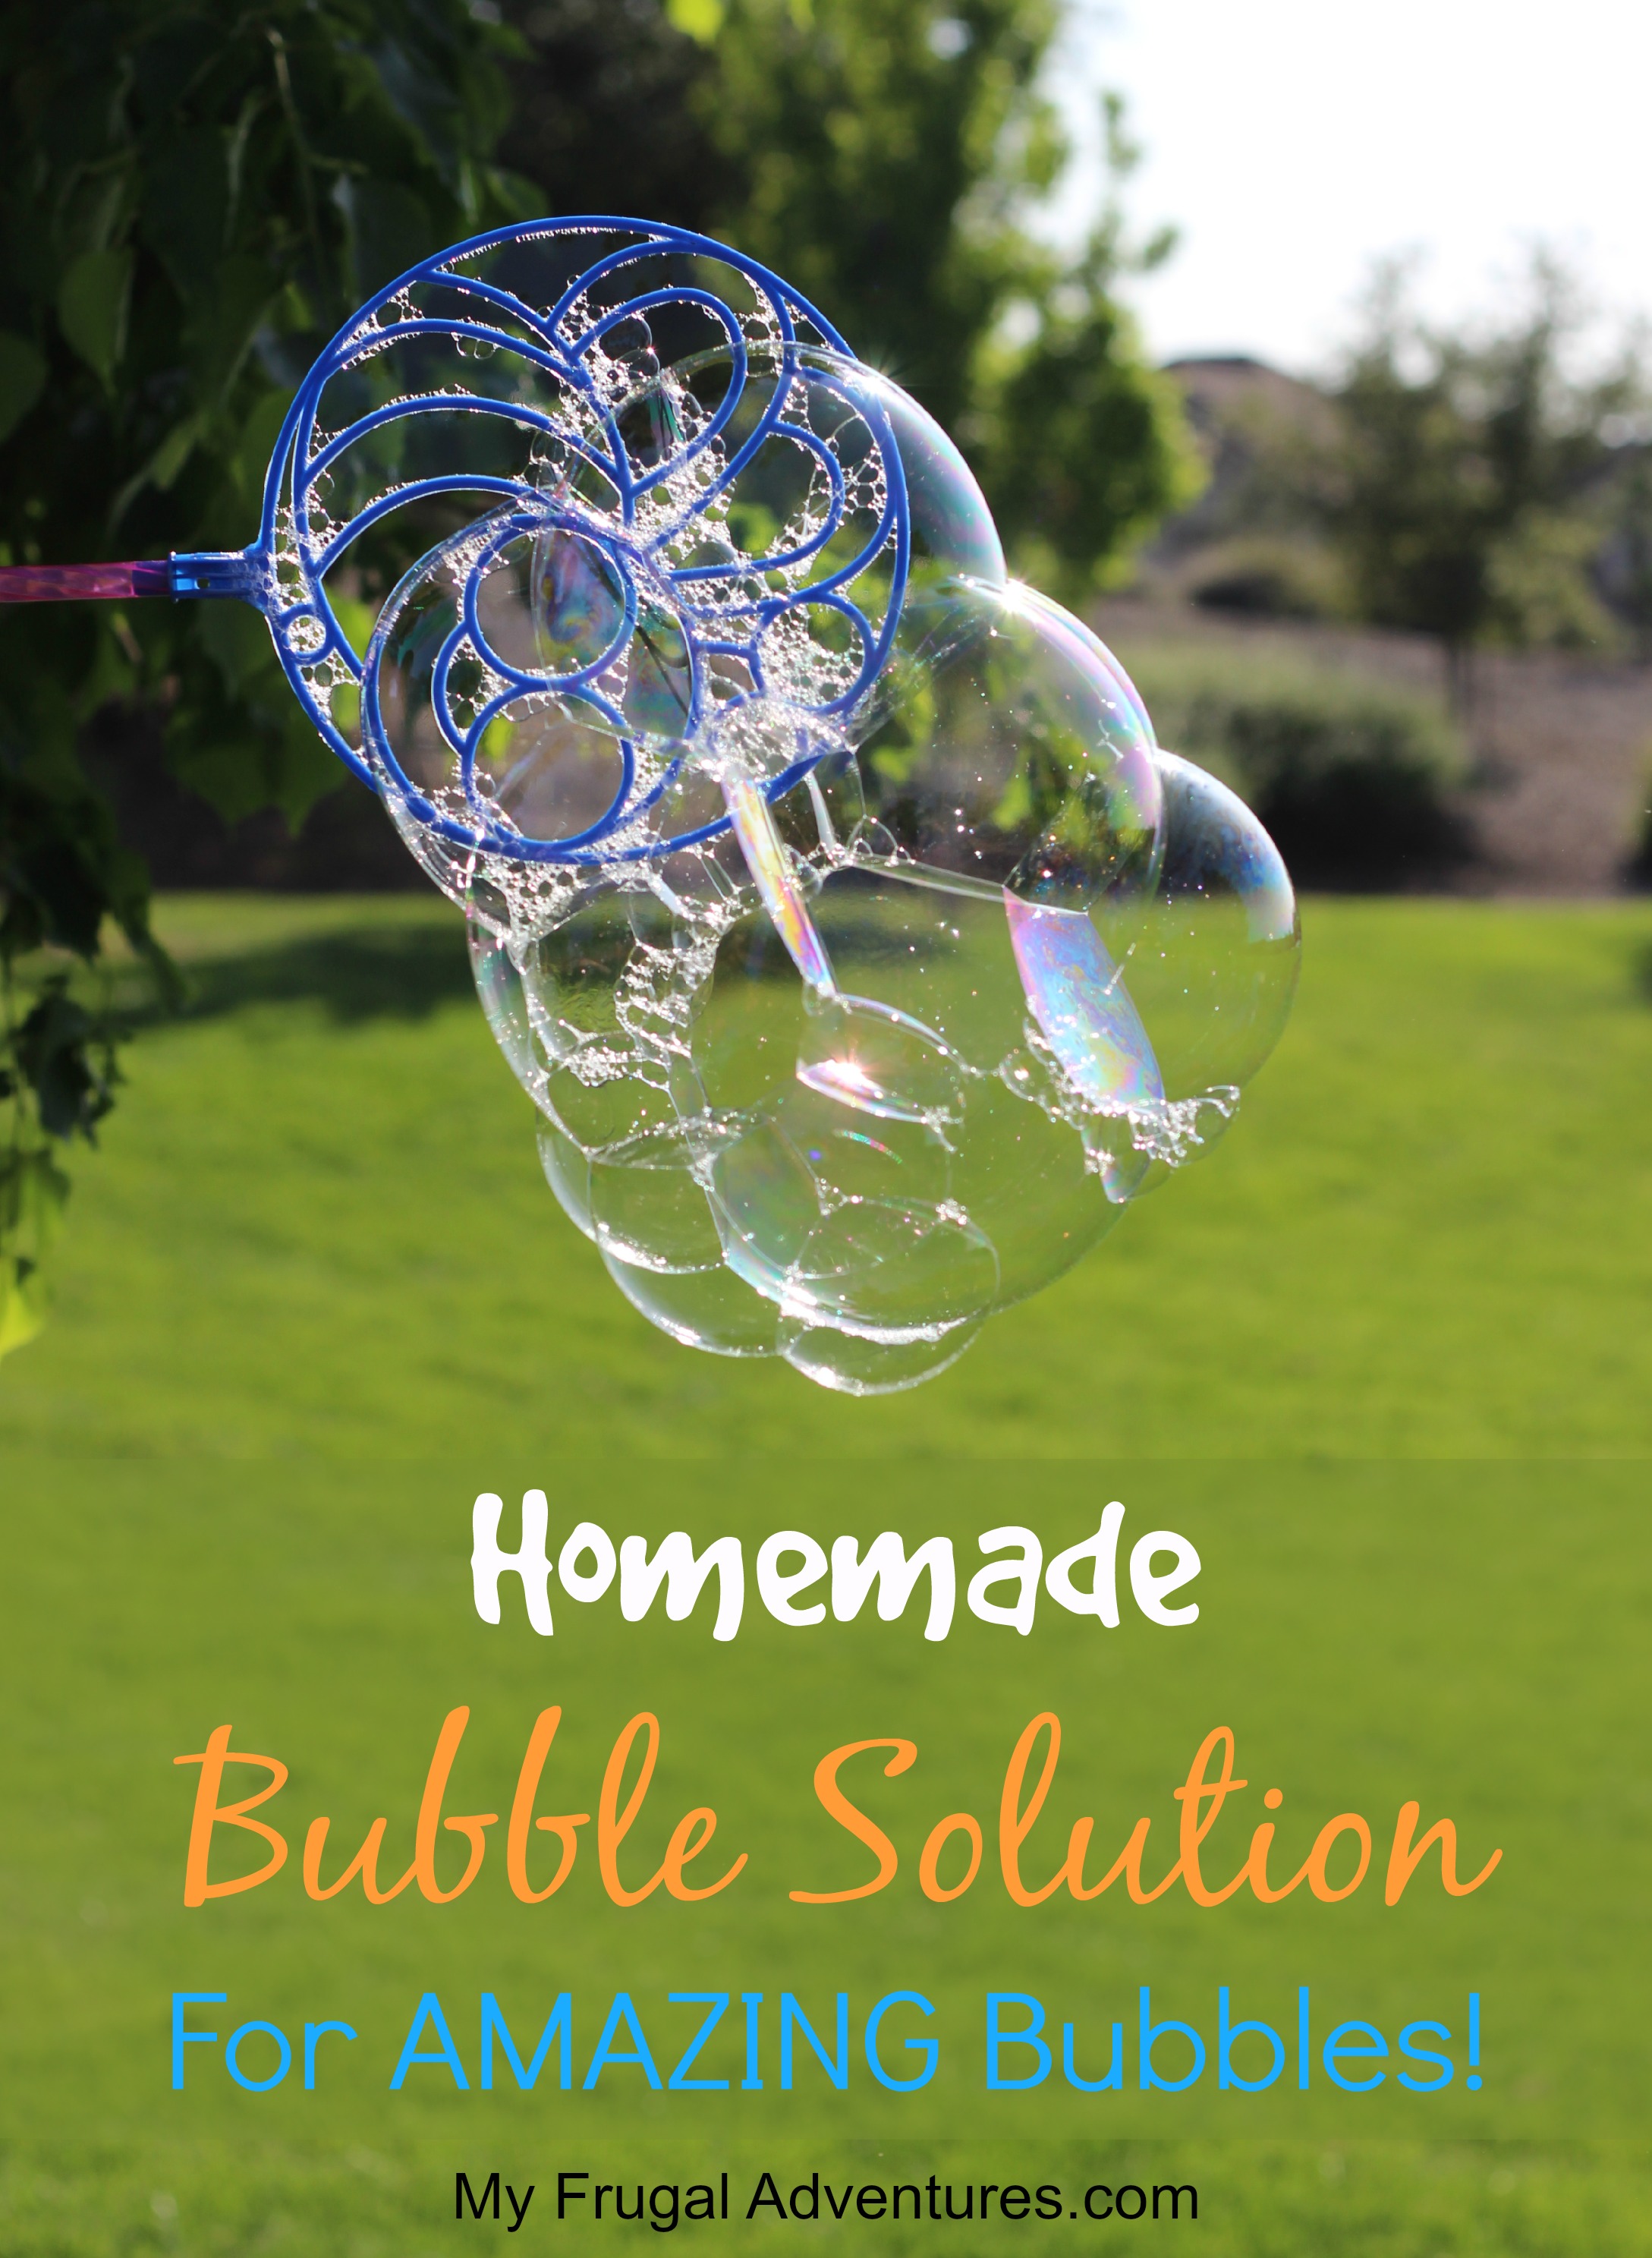 How to Make Your Own Bubble Solution